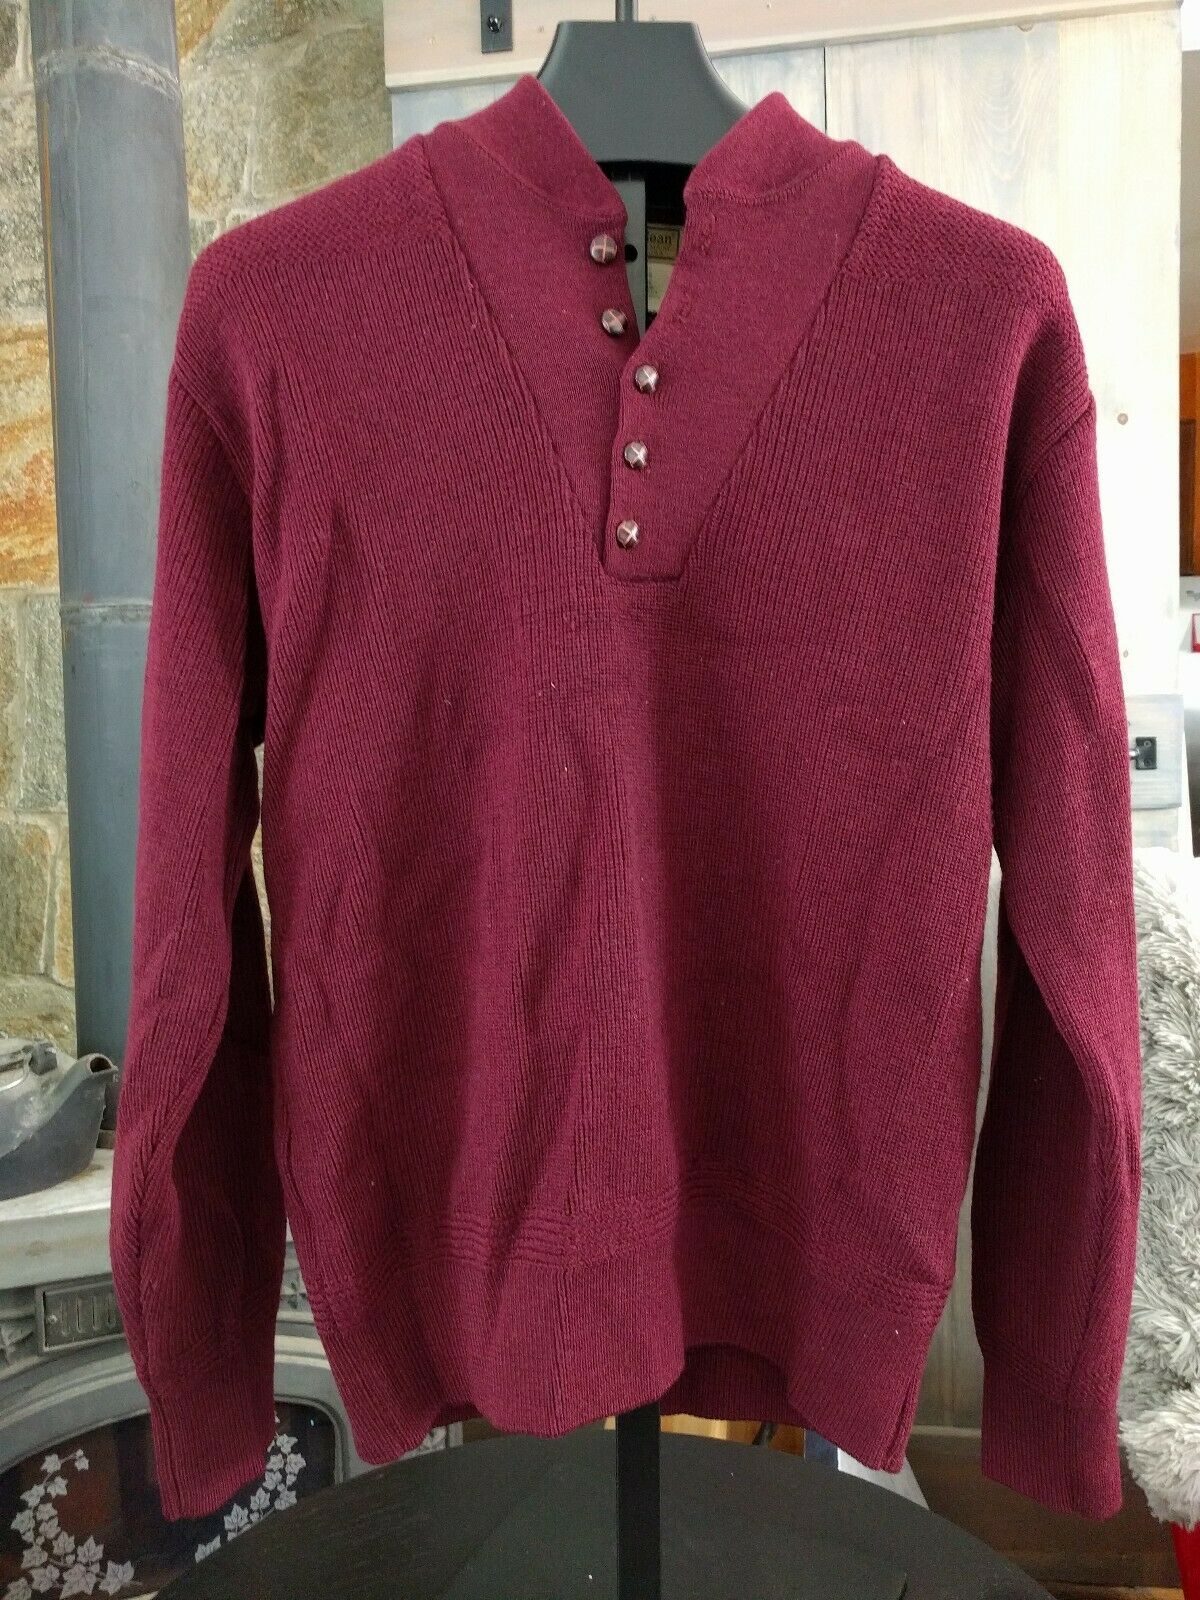 Primary image for VTG LL BEAN MENS BURGUNDY 5 BUTTON KNIT 100% WOOL PULLOVER SWEATER LARGE USA